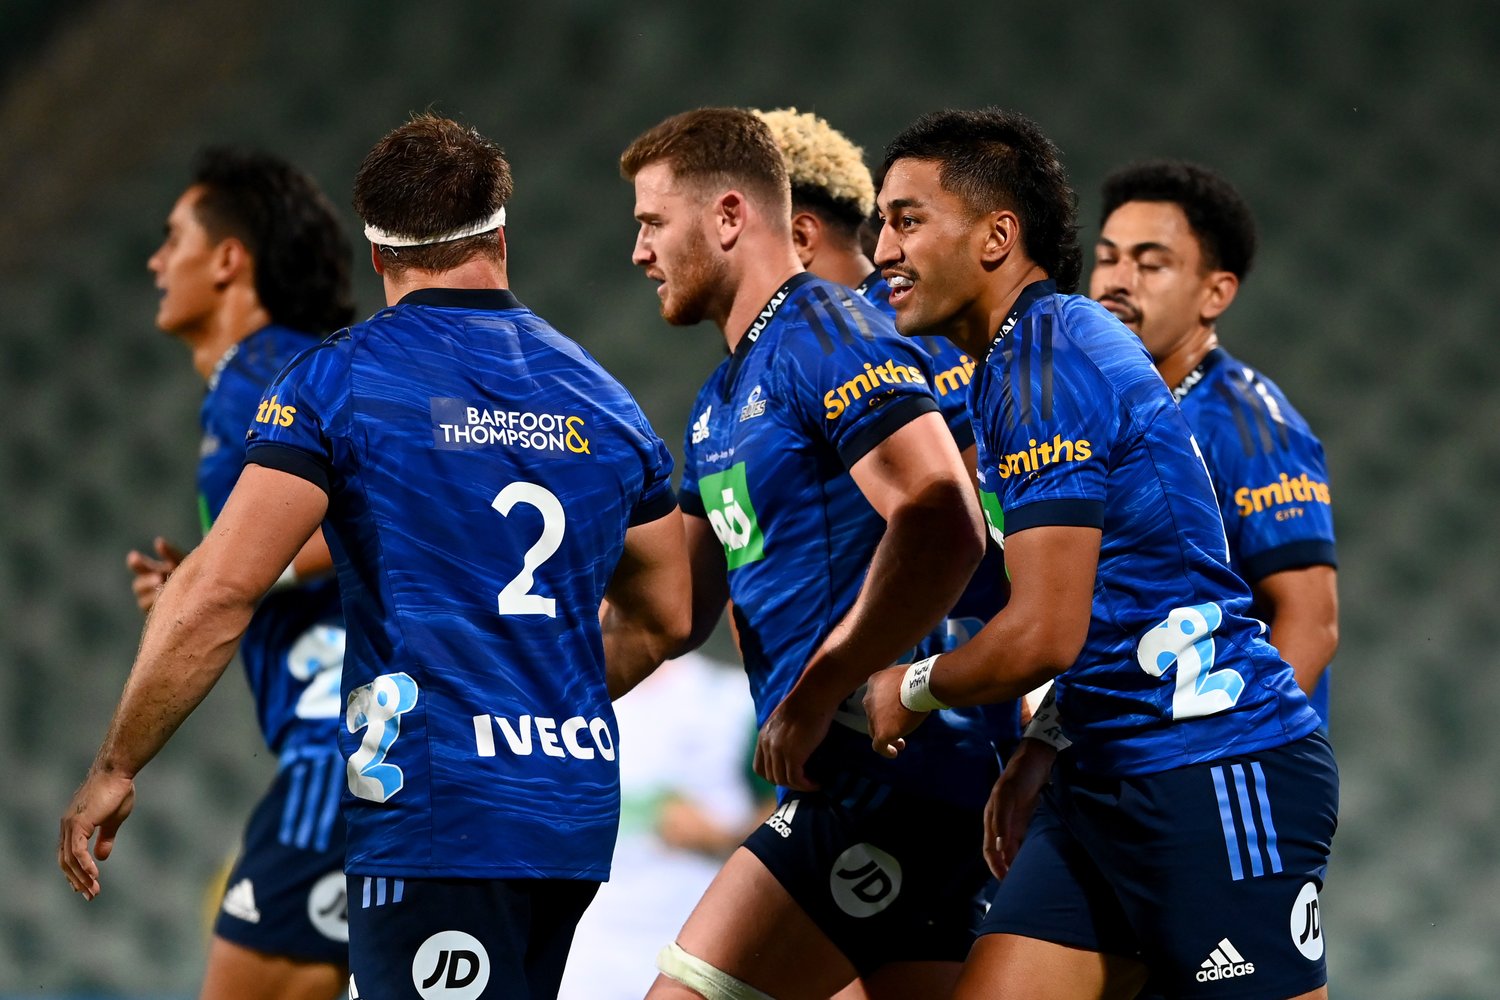 BLUES LOOKING TO BOUNCE BACK TO BEST AFTER MISSING MATCH — Blues Rugby